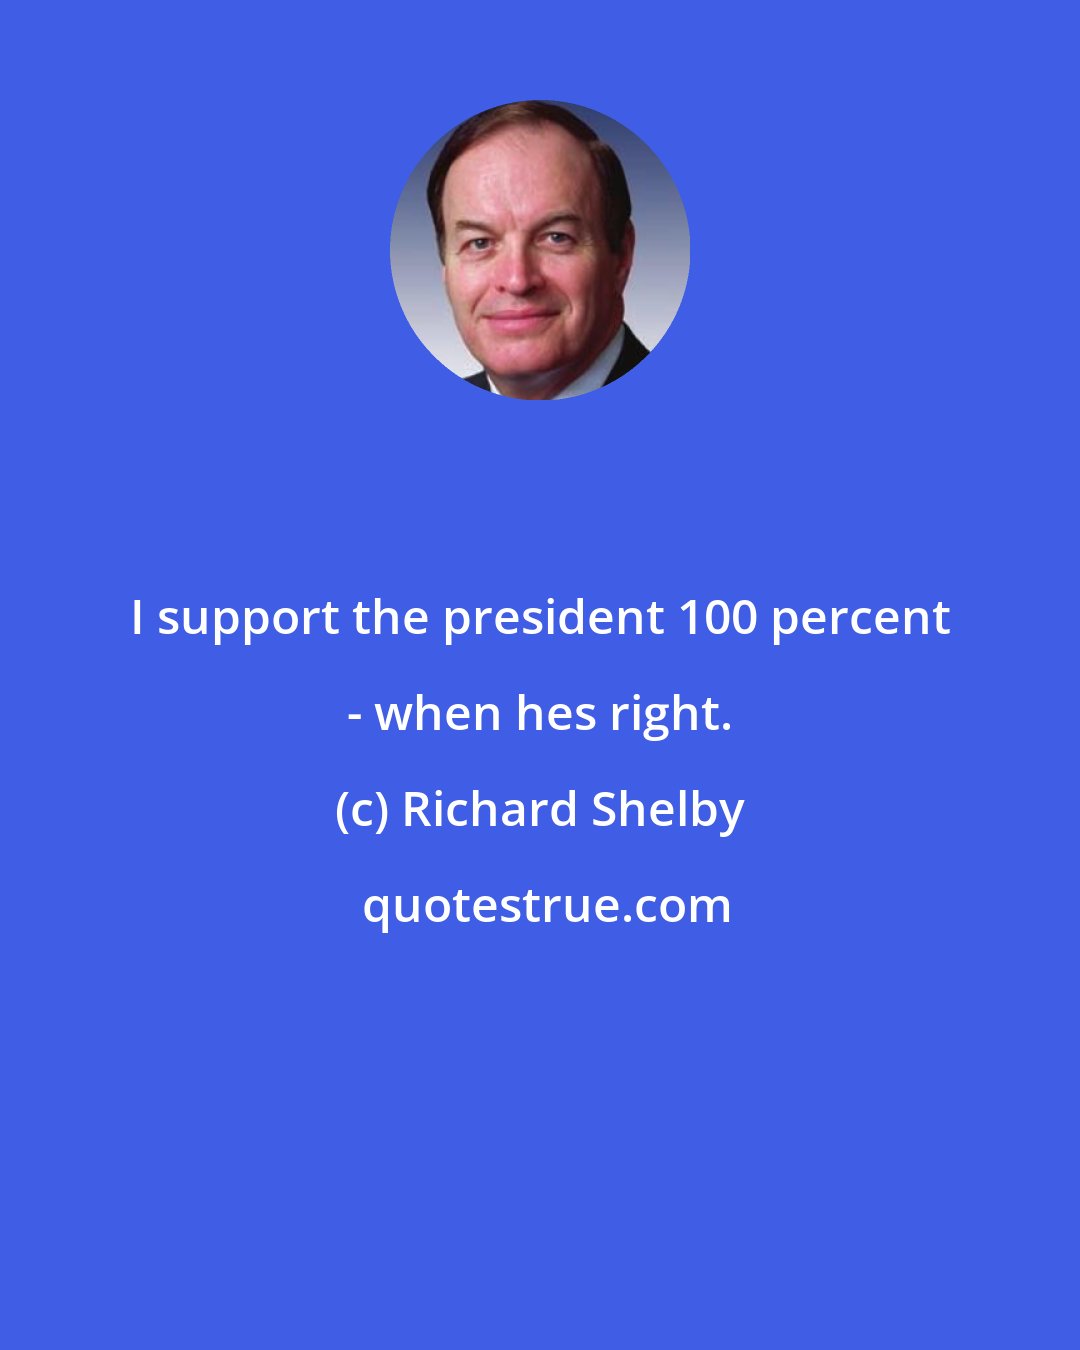 Richard Shelby: I support the president 100 percent - when hes right.